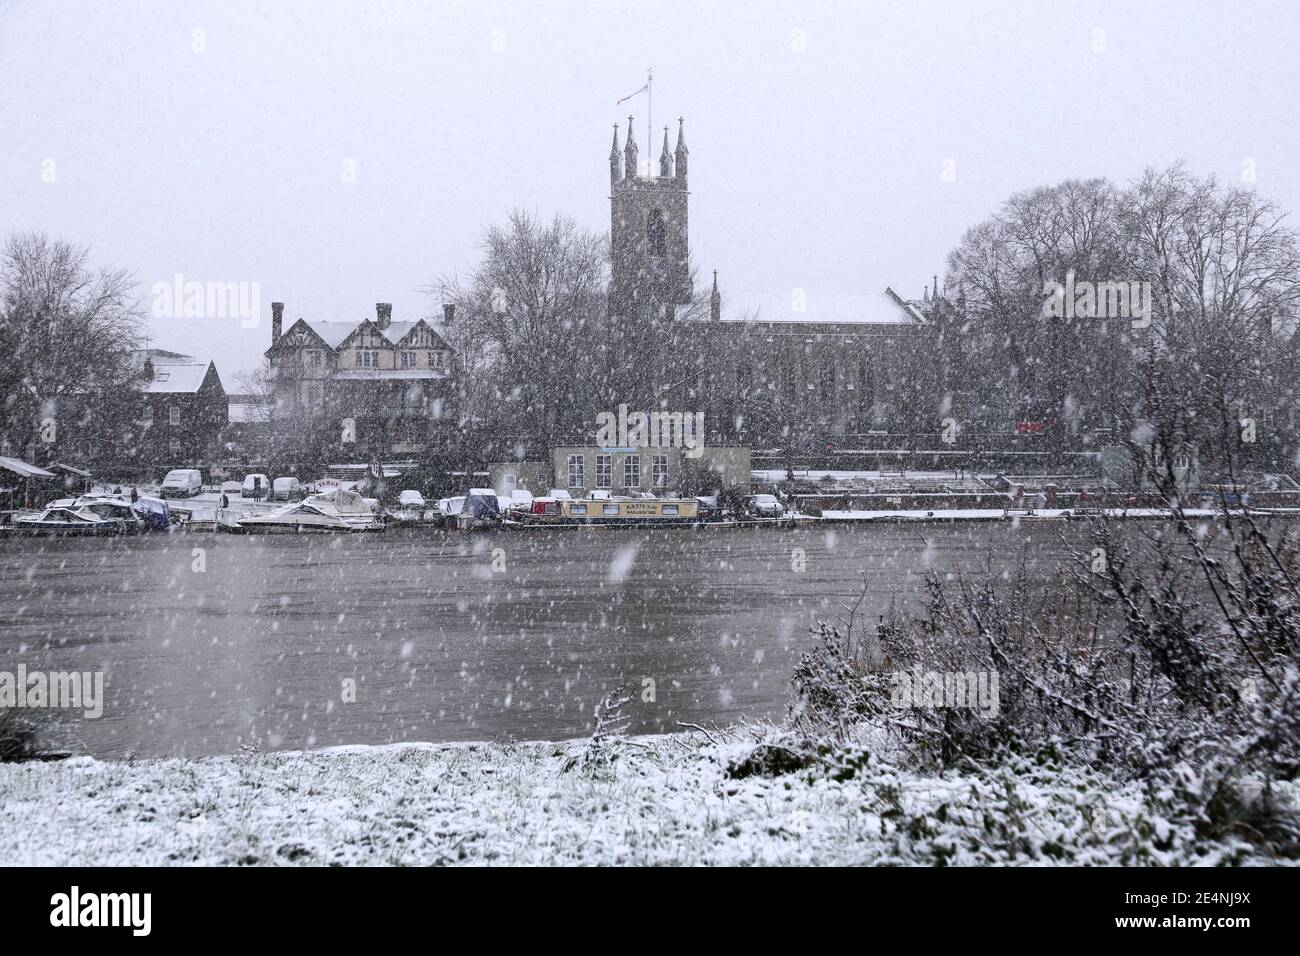 St Mary's Church at Hampton during heavy snow, seen from Sadlers Ride, Hurst Park, East Molesey, Surrey, England, Great Britain, UK, Europe Stock Photo